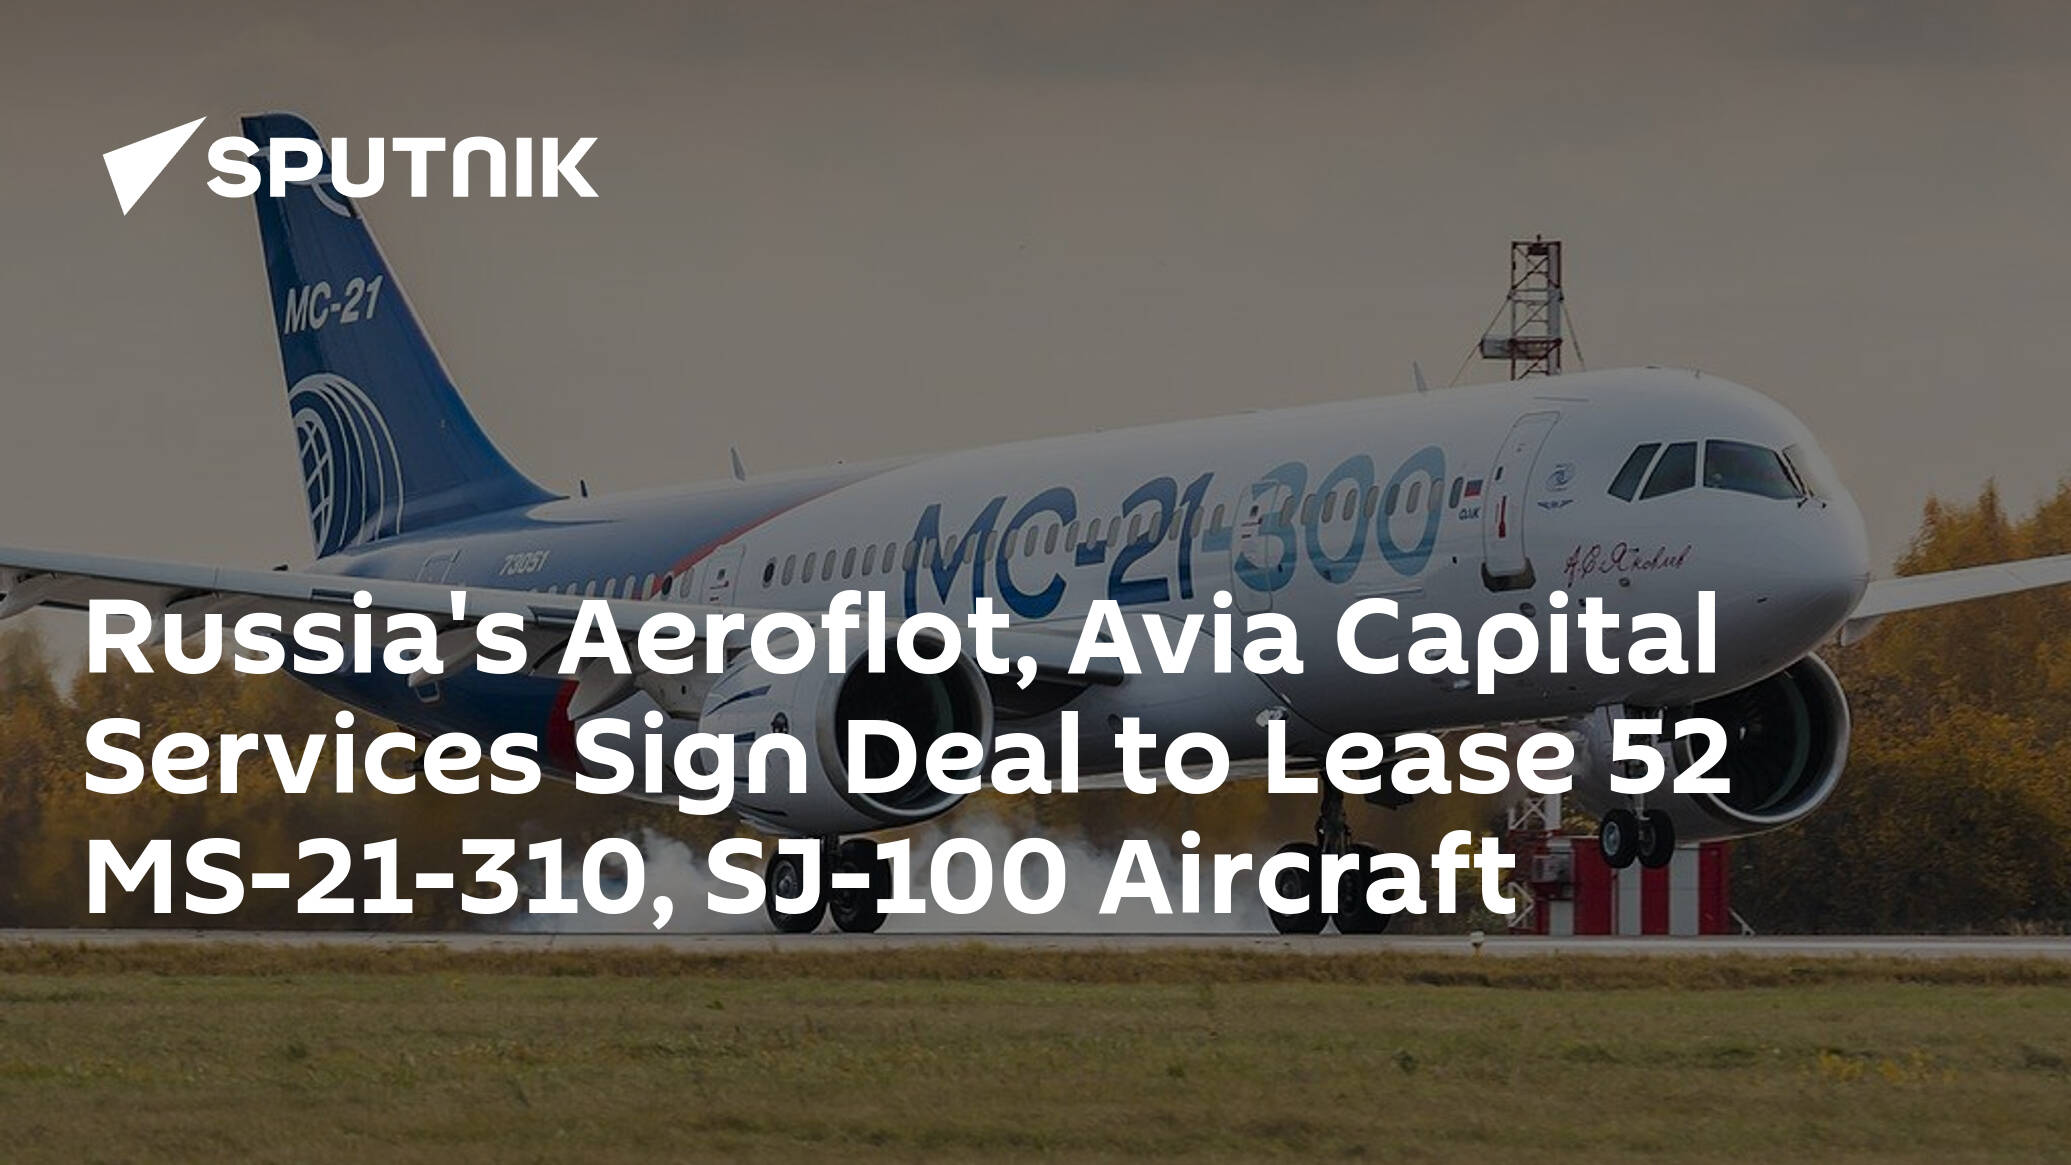 Russia's Aeroflot, Avia Capital Services Sign Deal to Lease 52 MS-21-310, SJ-100 Aircraft